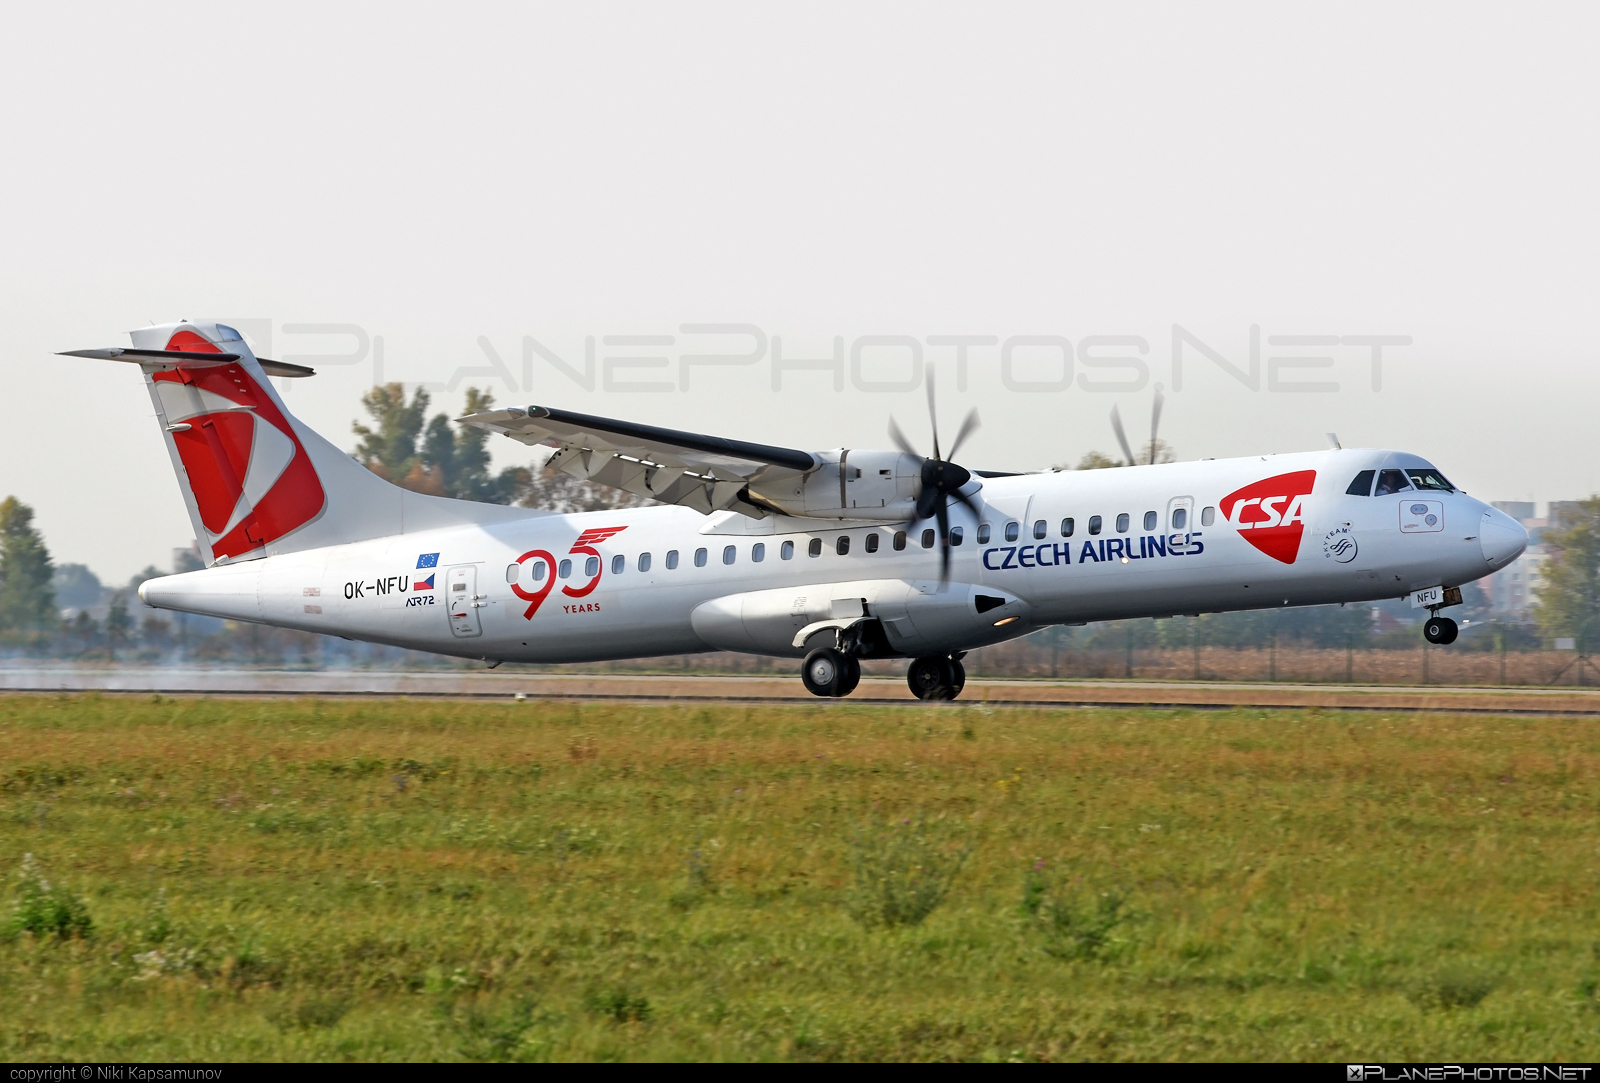 ATR 72-212A - OK-NFU operated by CSA Czech Airlines #atr #atr72 #atr72212a #atr72500 #csa #czechairlines